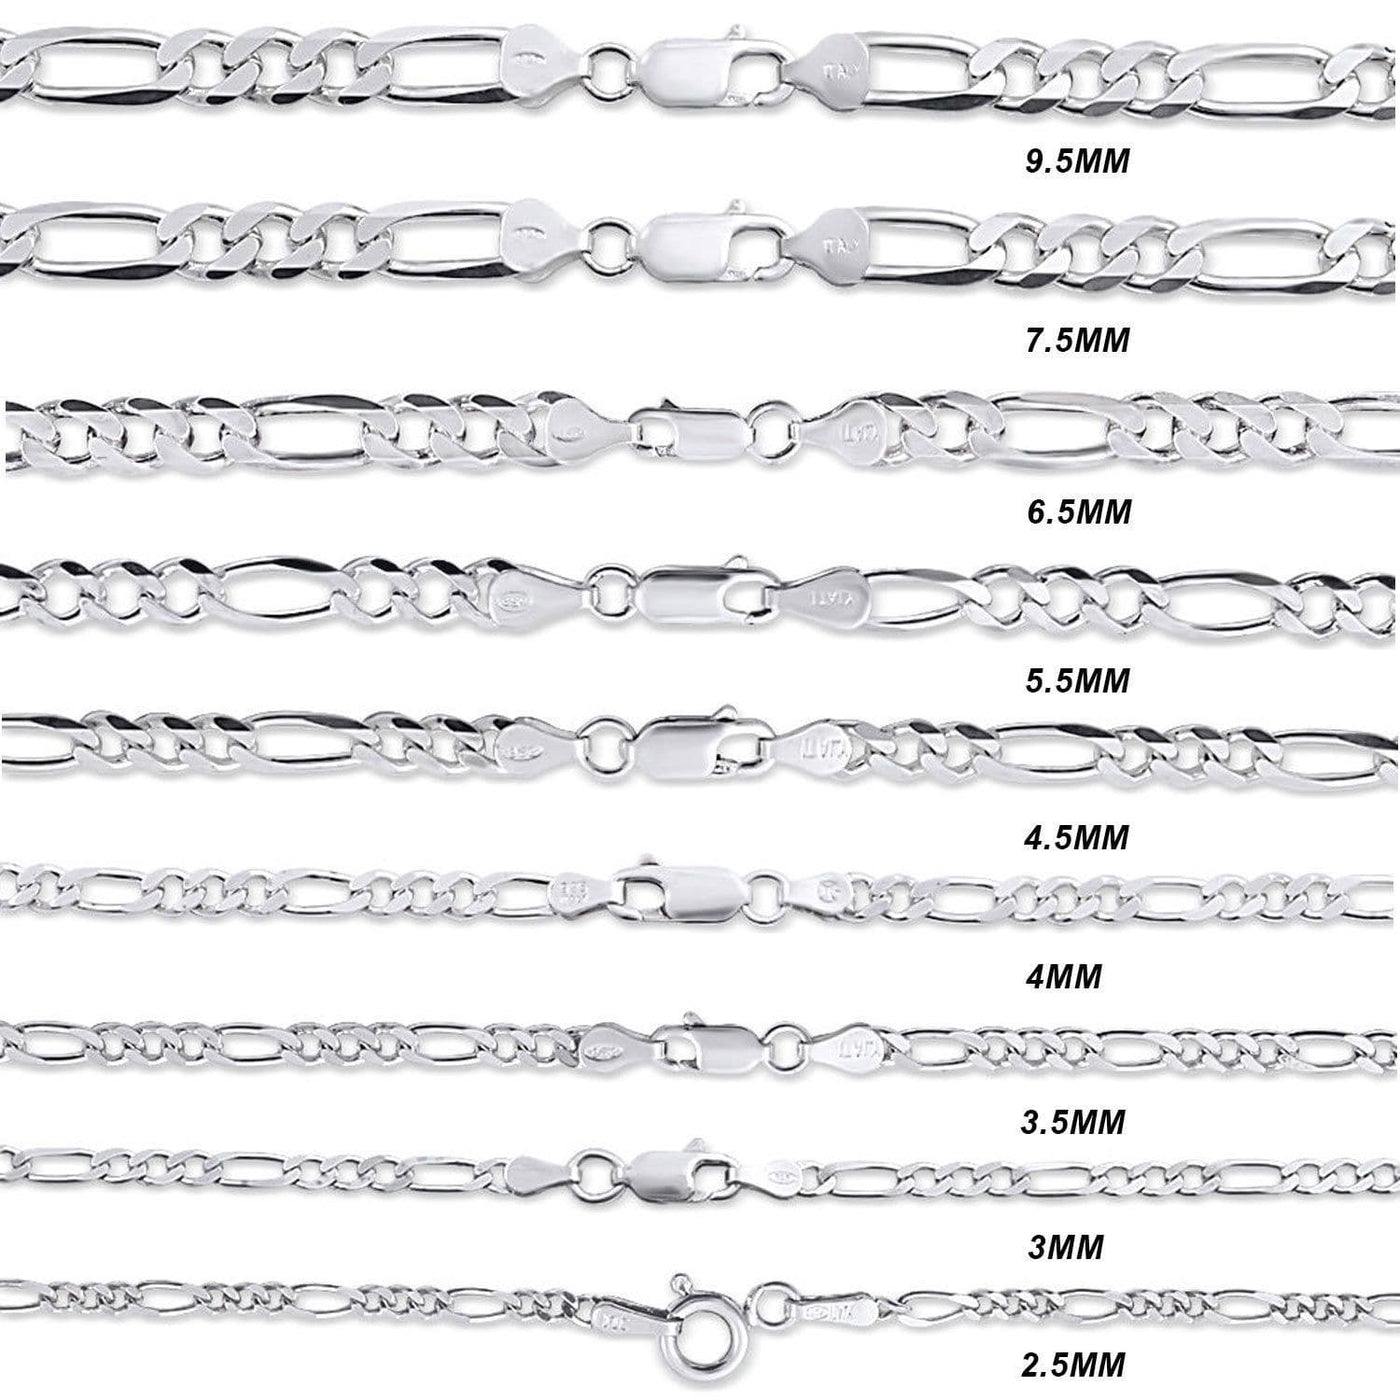 What Are the Benefits of Buying a Sterling Silver Necklace?